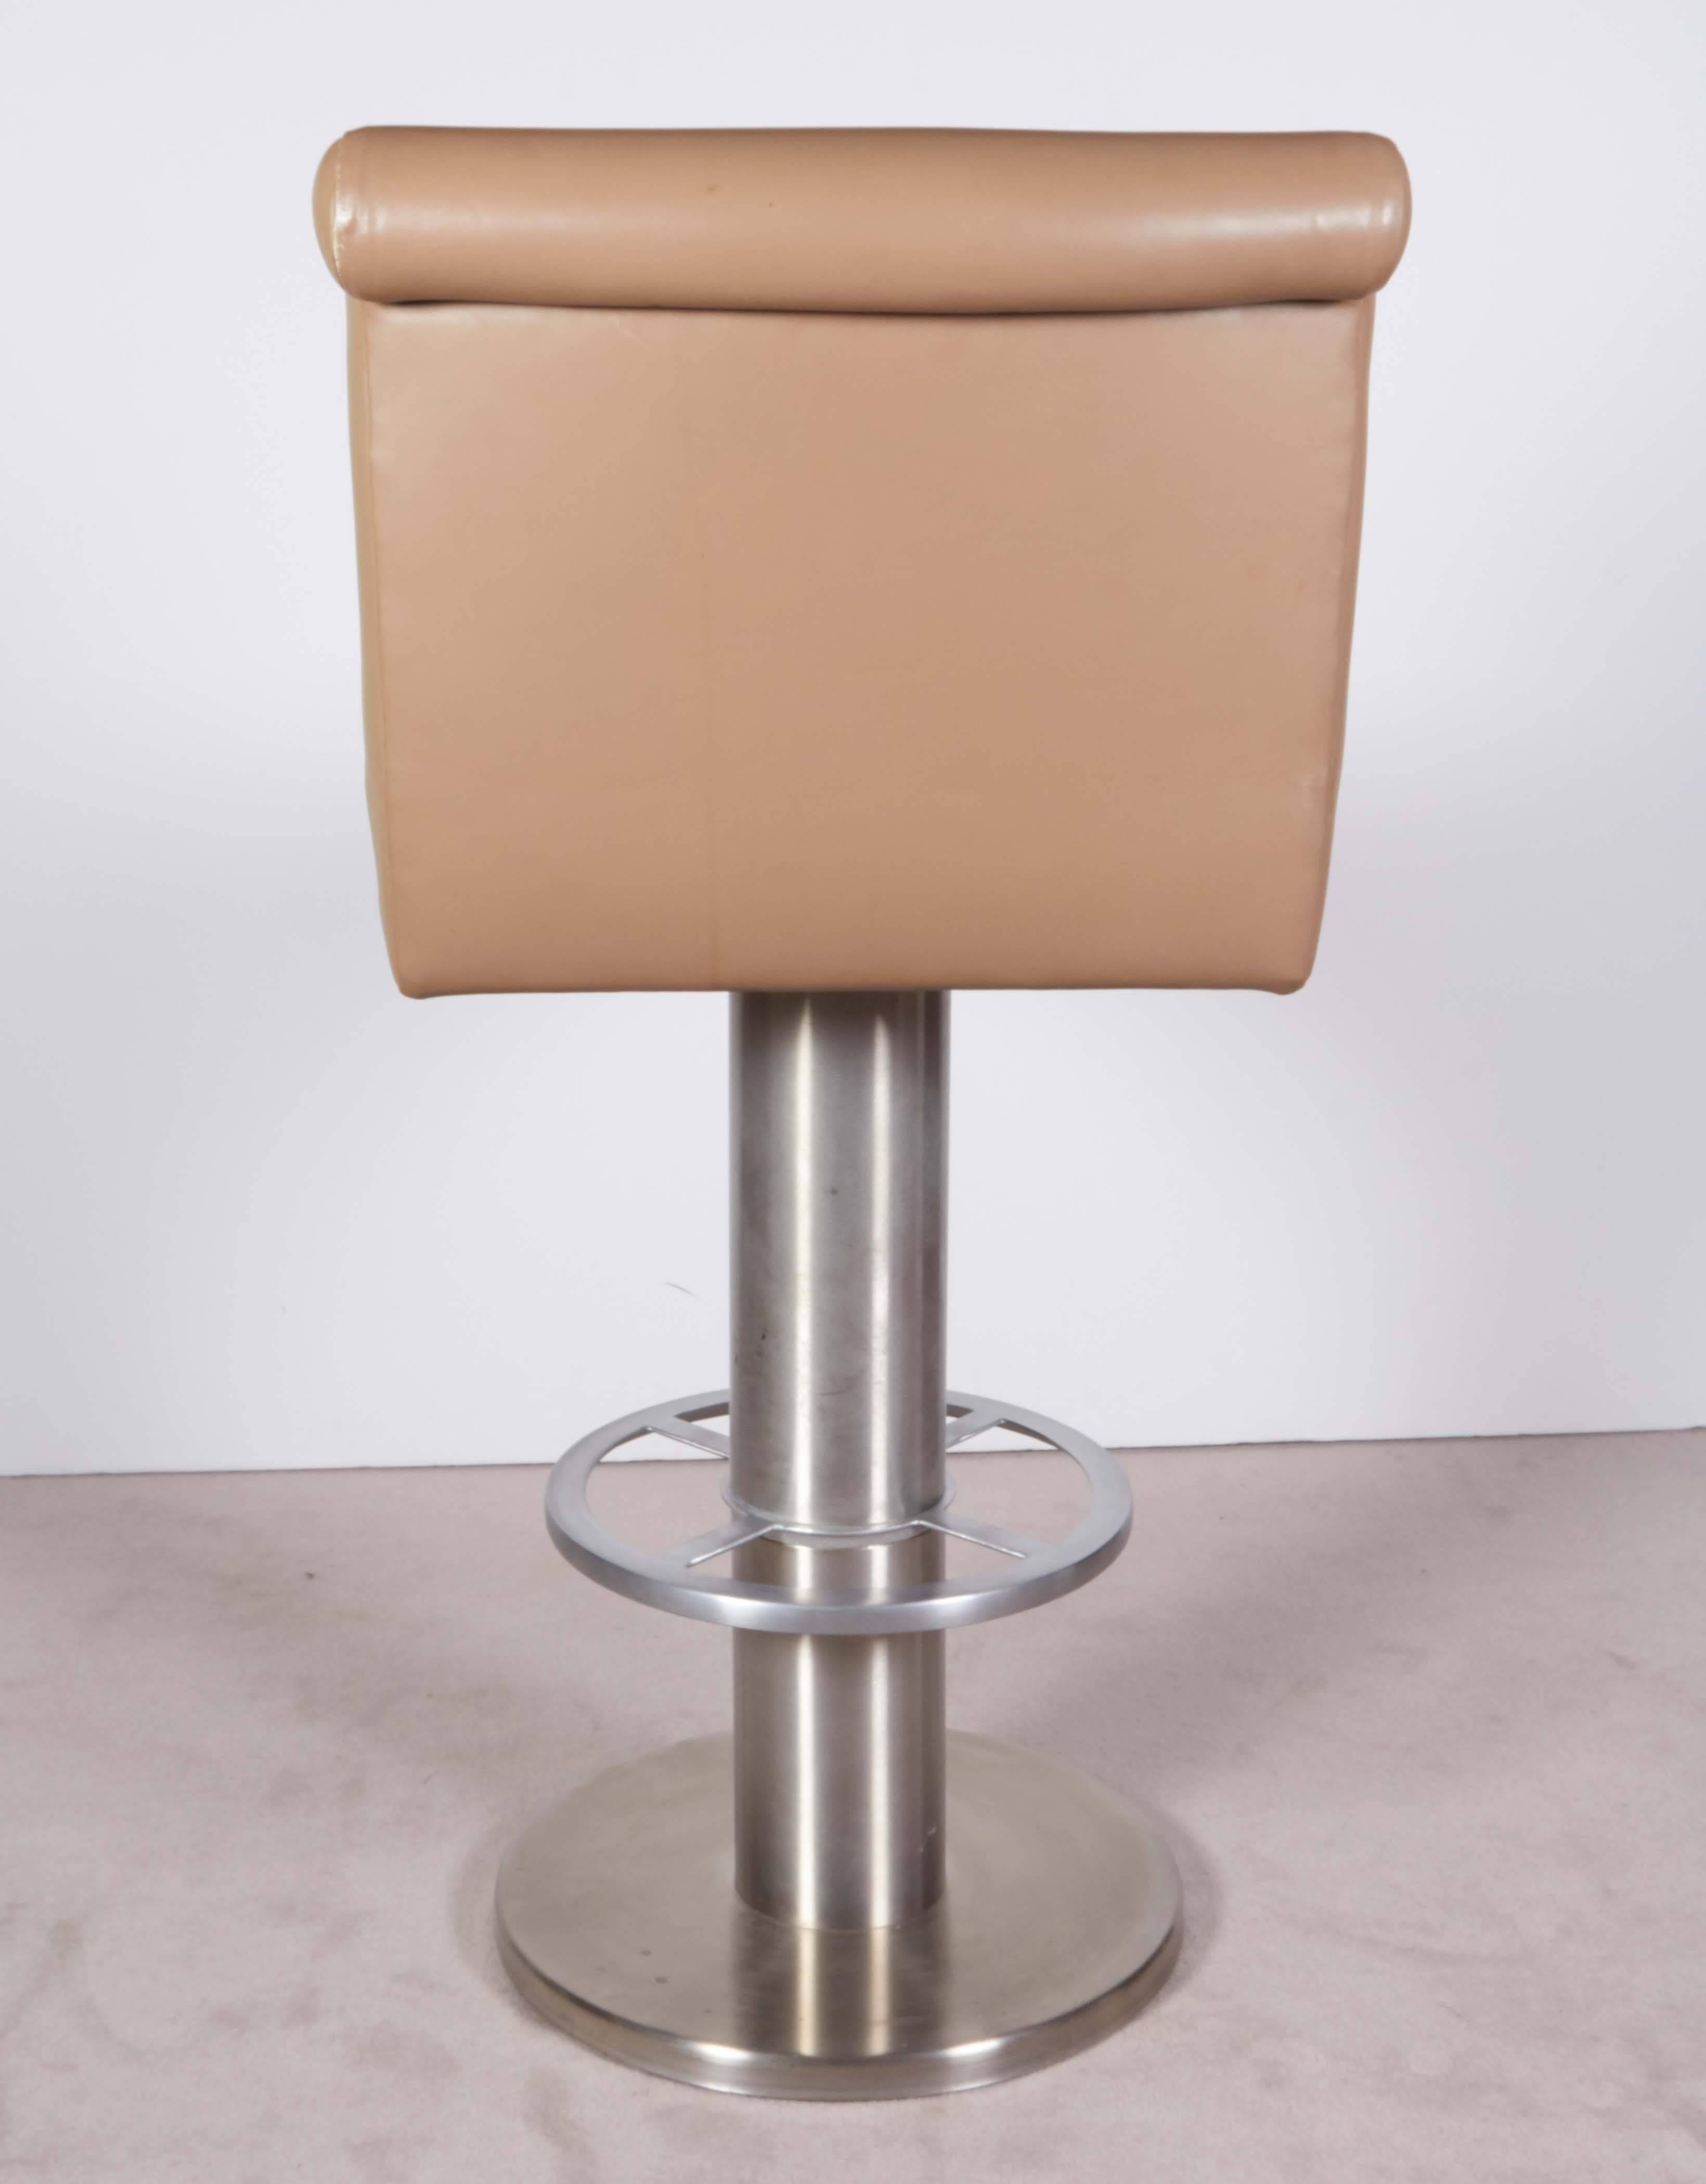 Set of Five Design For Leisure Barstools in Beige Leather on Stainless Steel 2